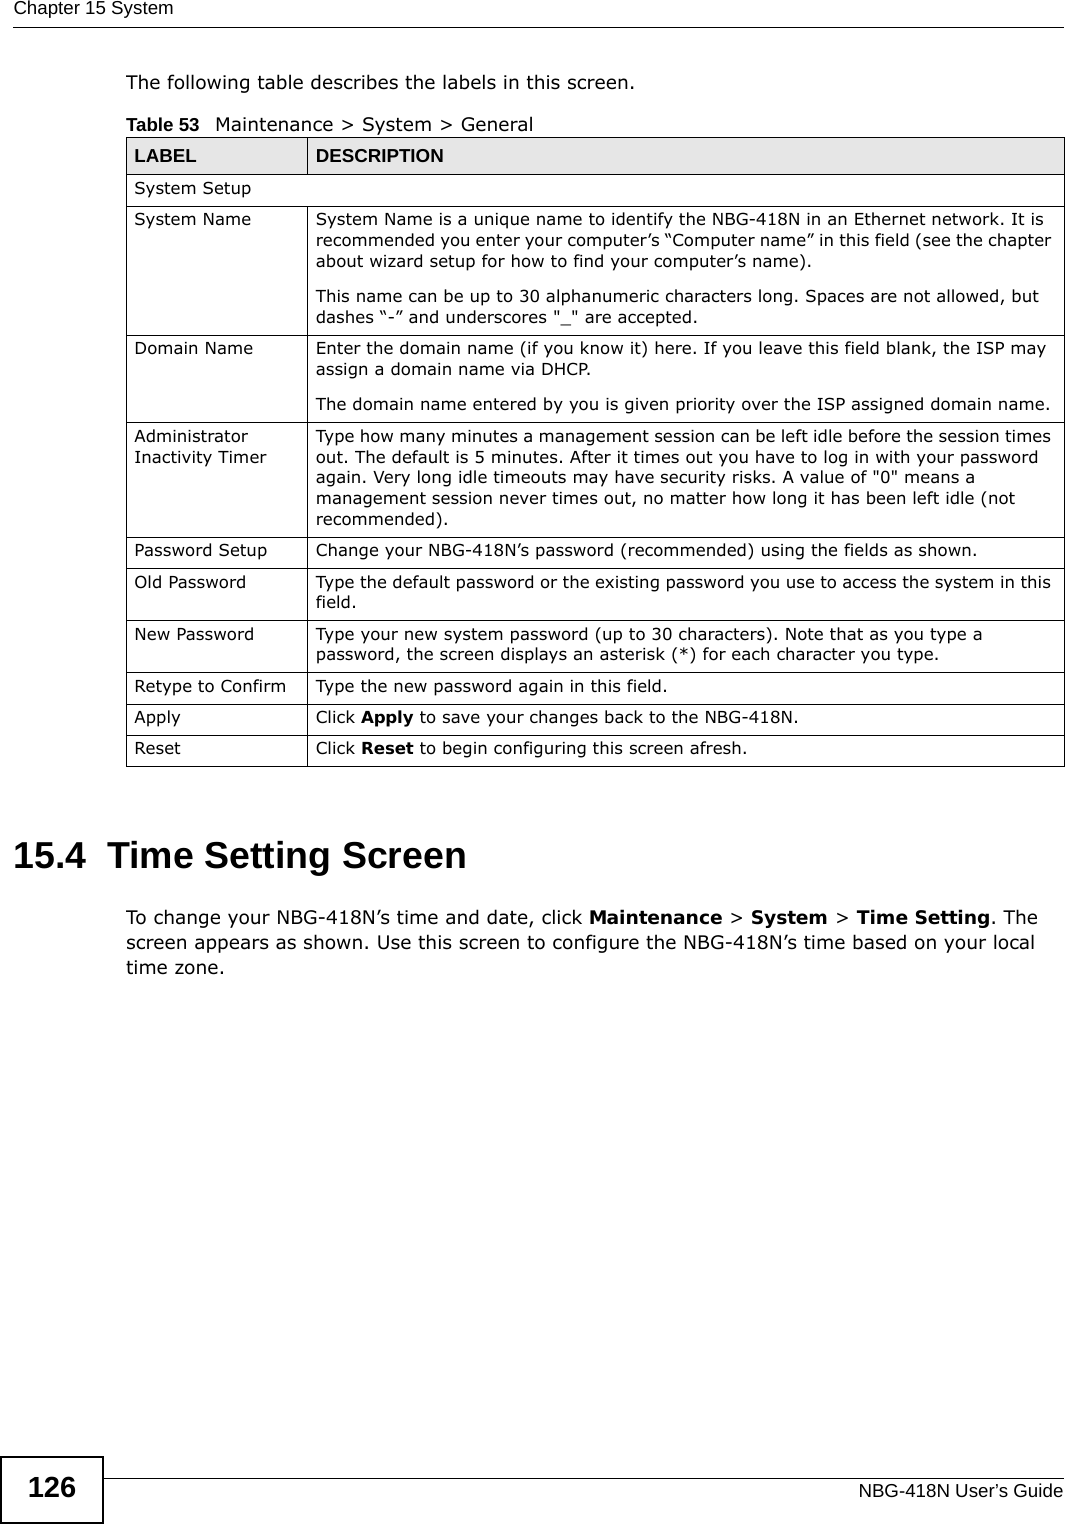 Chapter 15 SystemNBG-418N User’s Guide126The following table describes the labels in this screen.15.4  Time Setting ScreenTo change your NBG-418N’s time and date, click Maintenance &gt; System &gt; Time Setting. The screen appears as shown. Use this screen to configure the NBG-418N’s time based on your local time zone.Table 53   Maintenance &gt; System &gt; GeneralLABEL DESCRIPTIONSystem SetupSystem Name System Name is a unique name to identify the NBG-418N in an Ethernet network. It is recommended you enter your computer’s “Computer name” in this field (see the chapter about wizard setup for how to find your computer’s name). This name can be up to 30 alphanumeric characters long. Spaces are not allowed, but dashes “-” and underscores &quot;_&quot; are accepted.Domain Name Enter the domain name (if you know it) here. If you leave this field blank, the ISP may assign a domain name via DHCP. The domain name entered by you is given priority over the ISP assigned domain name.Administrator Inactivity TimerType how many minutes a management session can be left idle before the session times out. The default is 5 minutes. After it times out you have to log in with your password again. Very long idle timeouts may have security risks. A value of &quot;0&quot; means a management session never times out, no matter how long it has been left idle (not recommended).Password Setup Change your NBG-418N’s password (recommended) using the fields as shown.Old Password Type the default password or the existing password you use to access the system in this field.New Password Type your new system password (up to 30 characters). Note that as you type a password, the screen displays an asterisk (*) for each character you type.Retype to Confirm Type the new password again in this field.Apply Click Apply to save your changes back to the NBG-418N.Reset Click Reset to begin configuring this screen afresh.